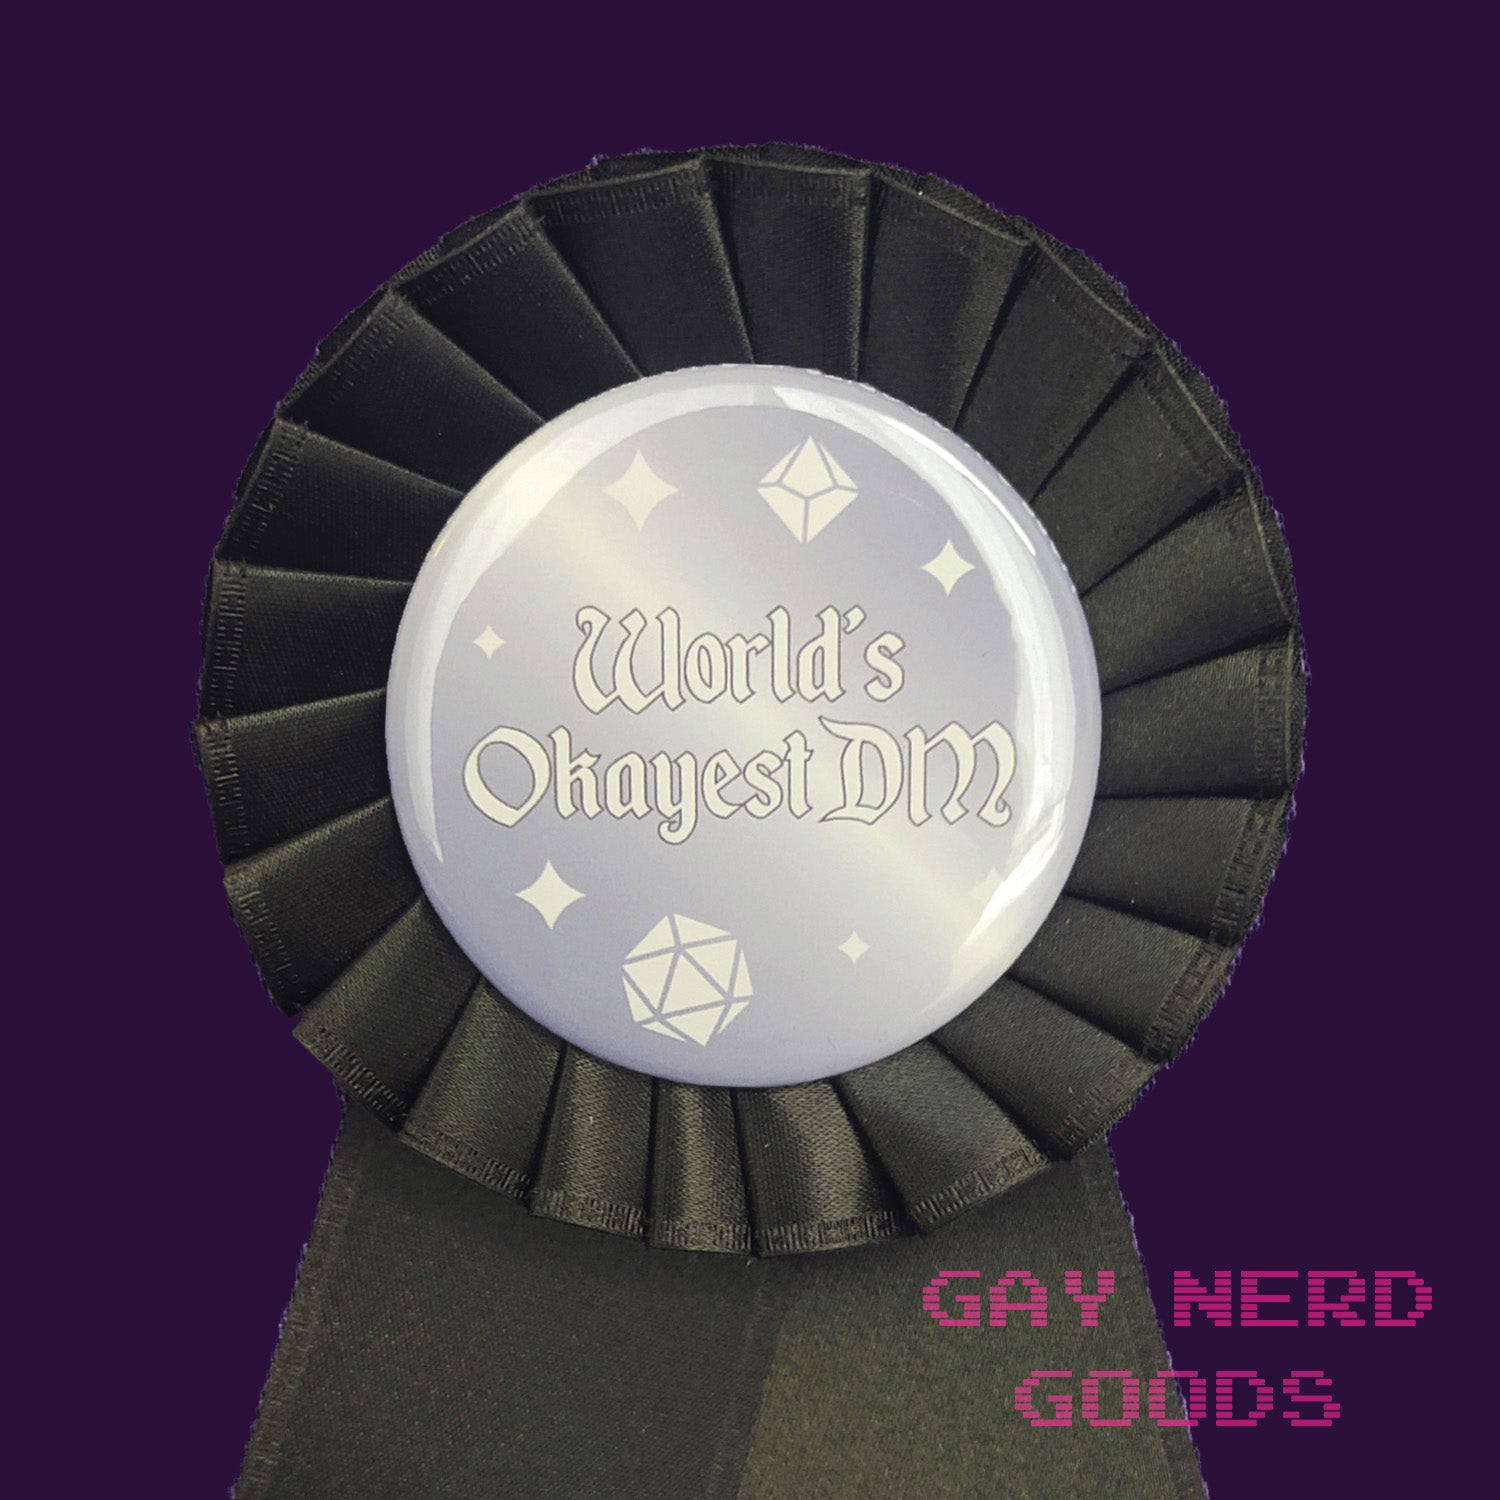 close up view of the "world's okayest DM" award ribbon. The text is white surrounded by white polyhedral dice and sparkles on a grey and white gradient background. The satin ribbon is black